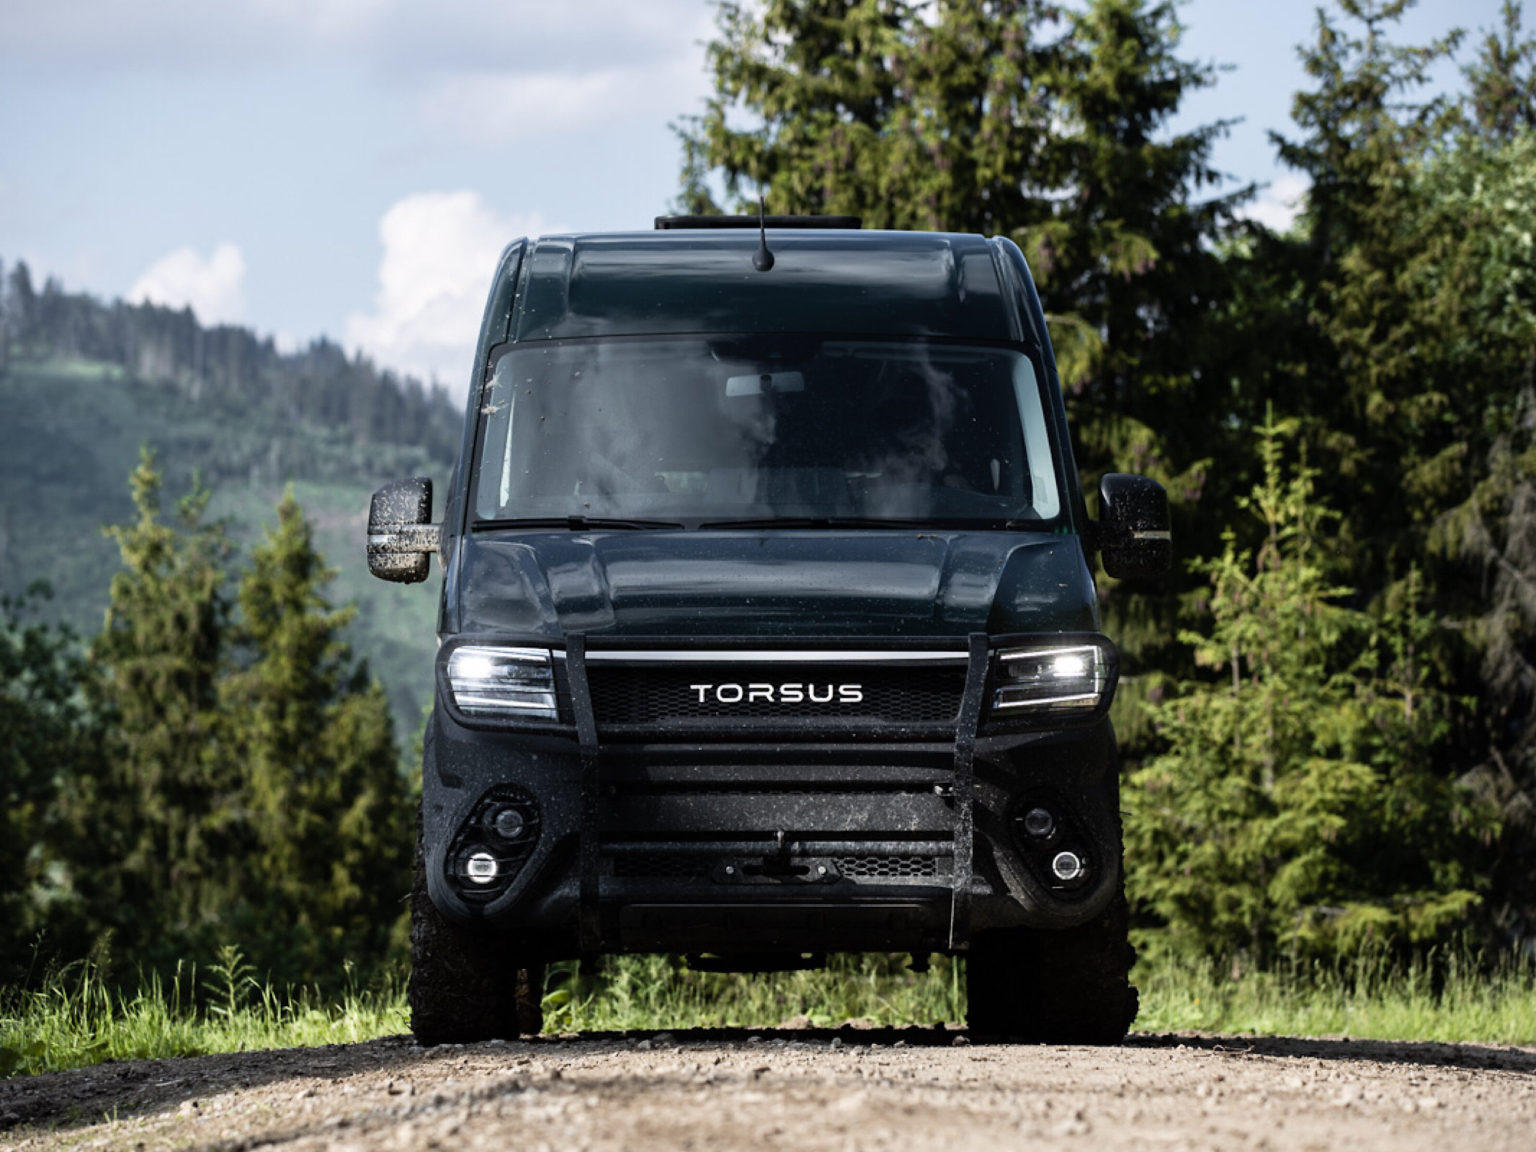 The Torus Terrastorm is designed to be nearly as off-road capable as a Jeep Wrangler.